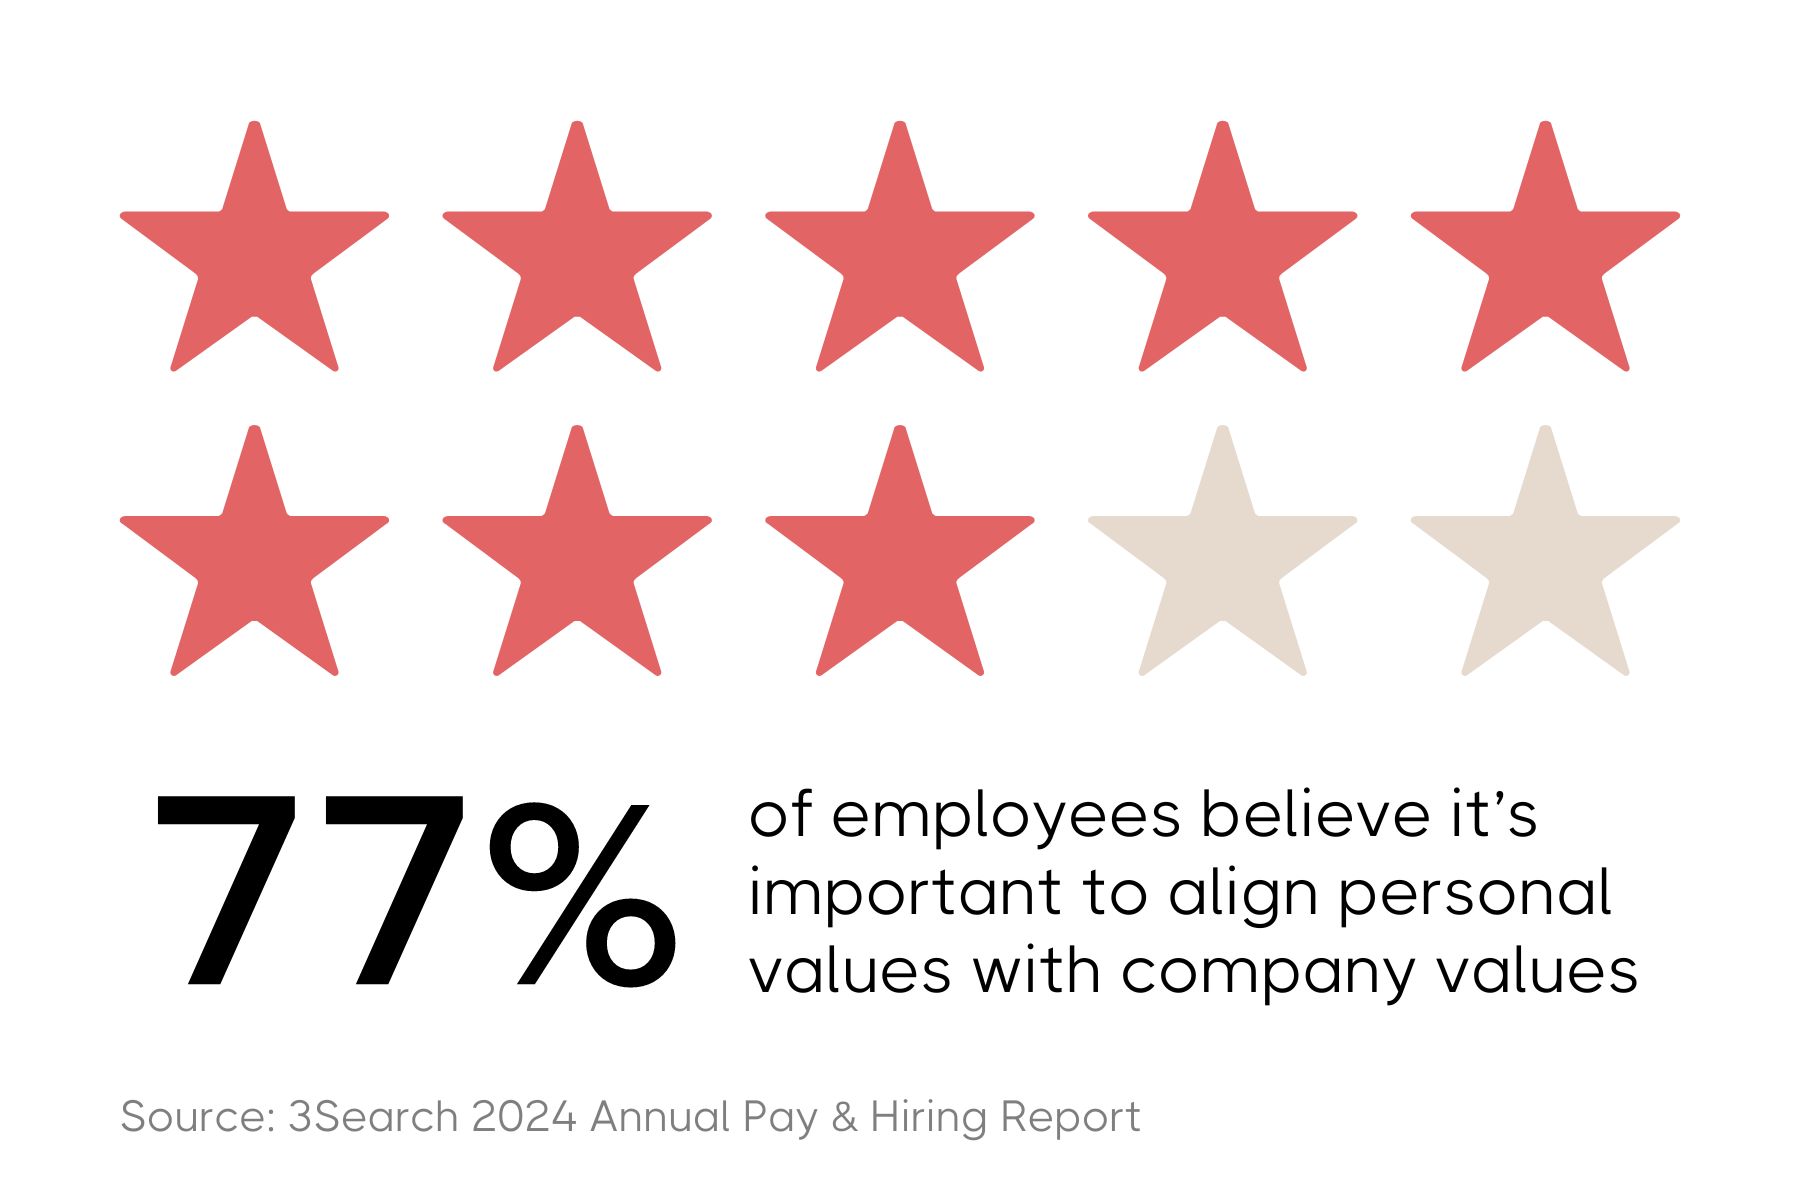 Alternative text for the image: "An infographic with a two-tone color scheme featuring stars at the top. Ten stars are displayed in total; seven are filled in with a red color, and three are a pale, almost colorless shade. Below the stars, a large black text states '77%' followed by smaller black text that reads 'of employees believe it’s important to align personal values with company values.' At the bottom is a citation for the source of the information: 'Source: 3Search 2024 Annual Pay & Hiring Report'."